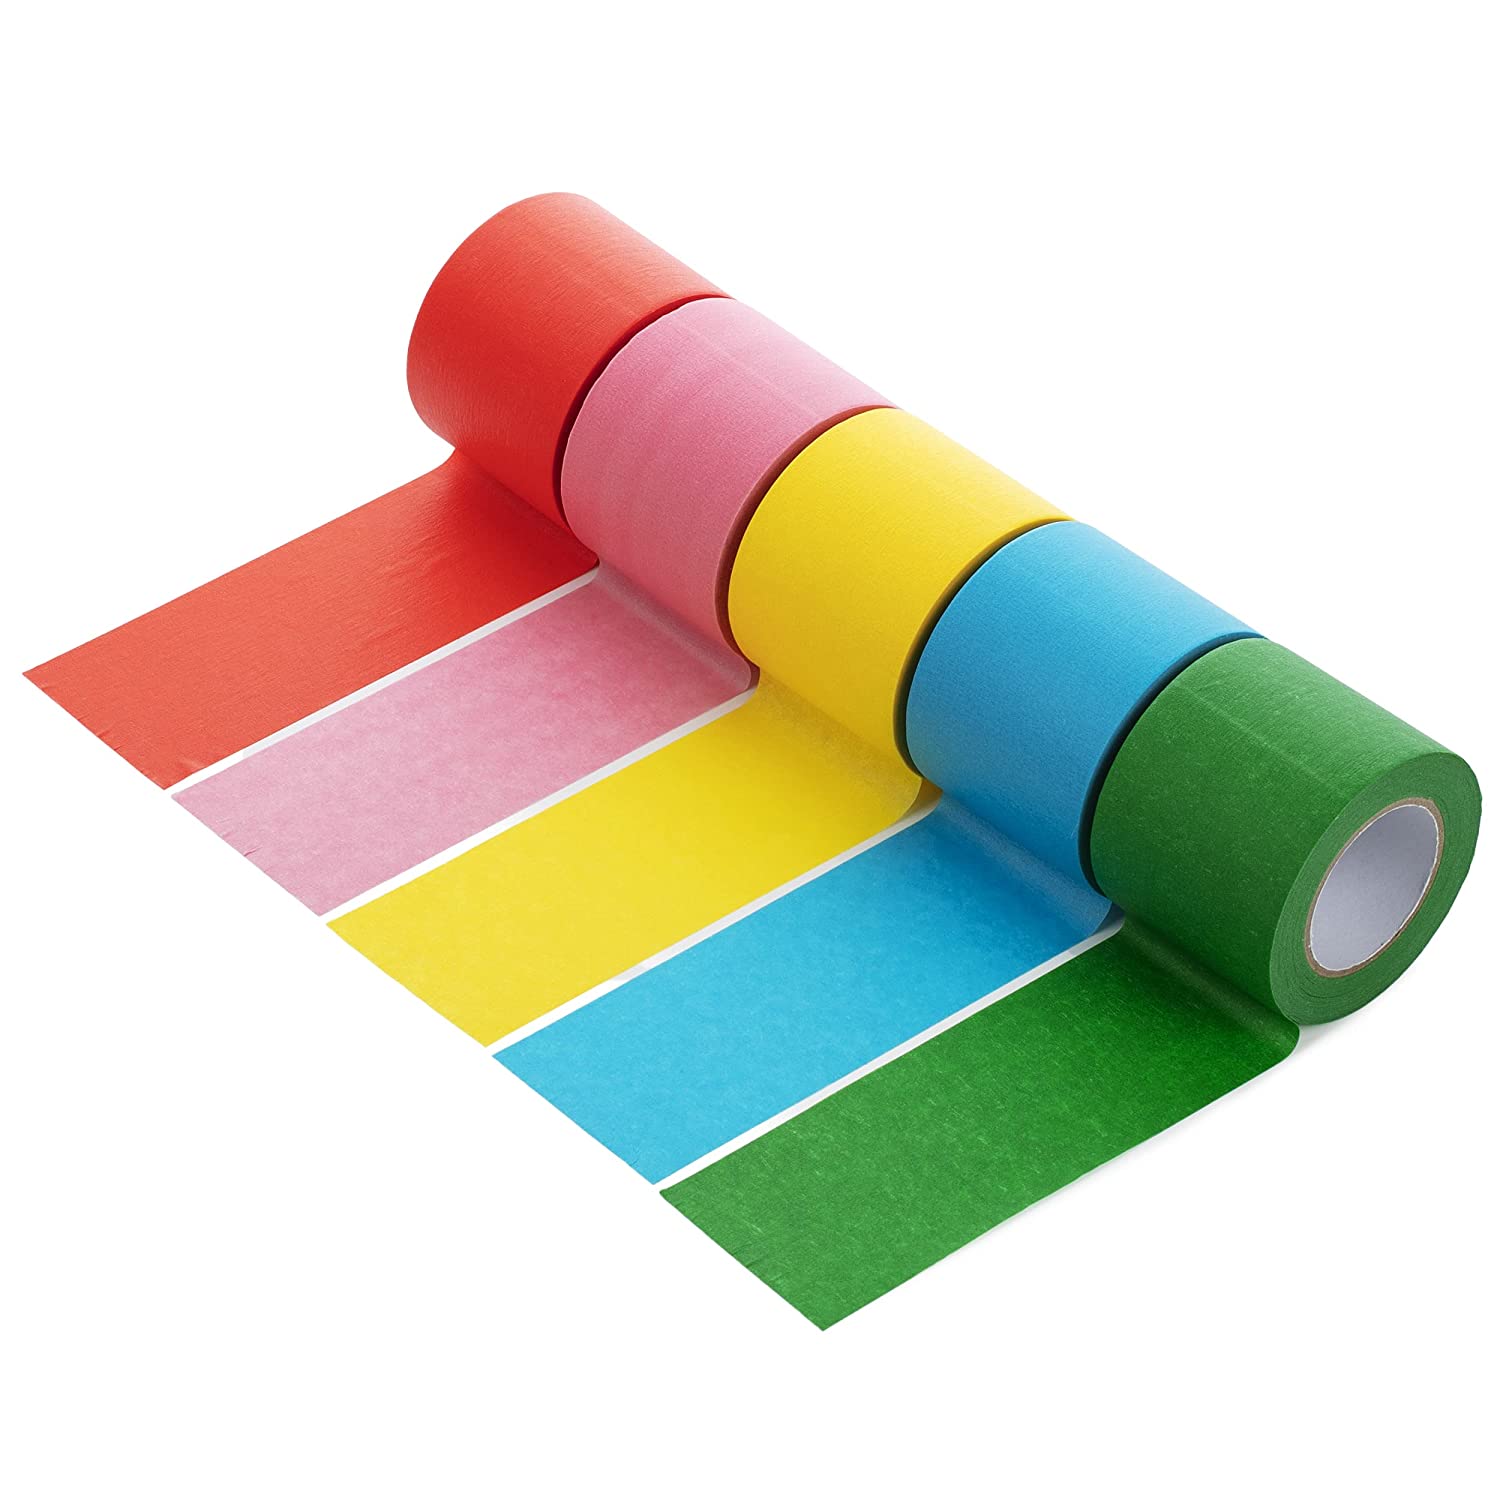 Colored Masking Tape, 16 Yards Per Roll, 2 Inch Wide, 5 Rolls, Colored  Painters Tape, Paper Tape, Colored Tape Rolls - Mr. Pen Store